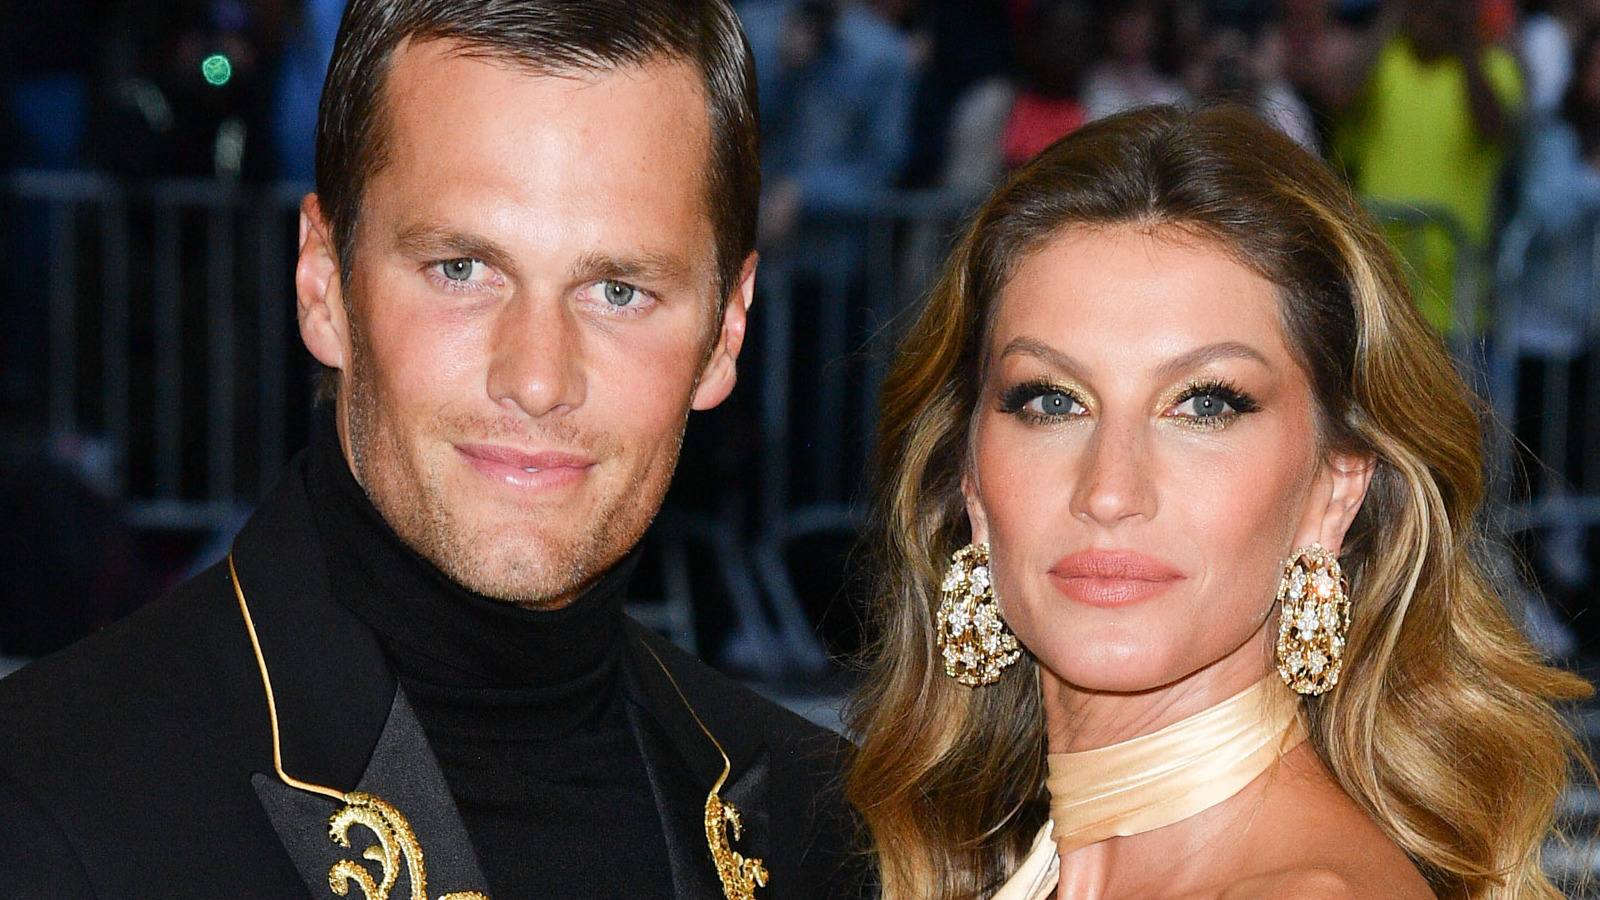 Tom Brady And Gisele Bündchen Who Will Find Love Again First Experts Weigh In Exclusive 